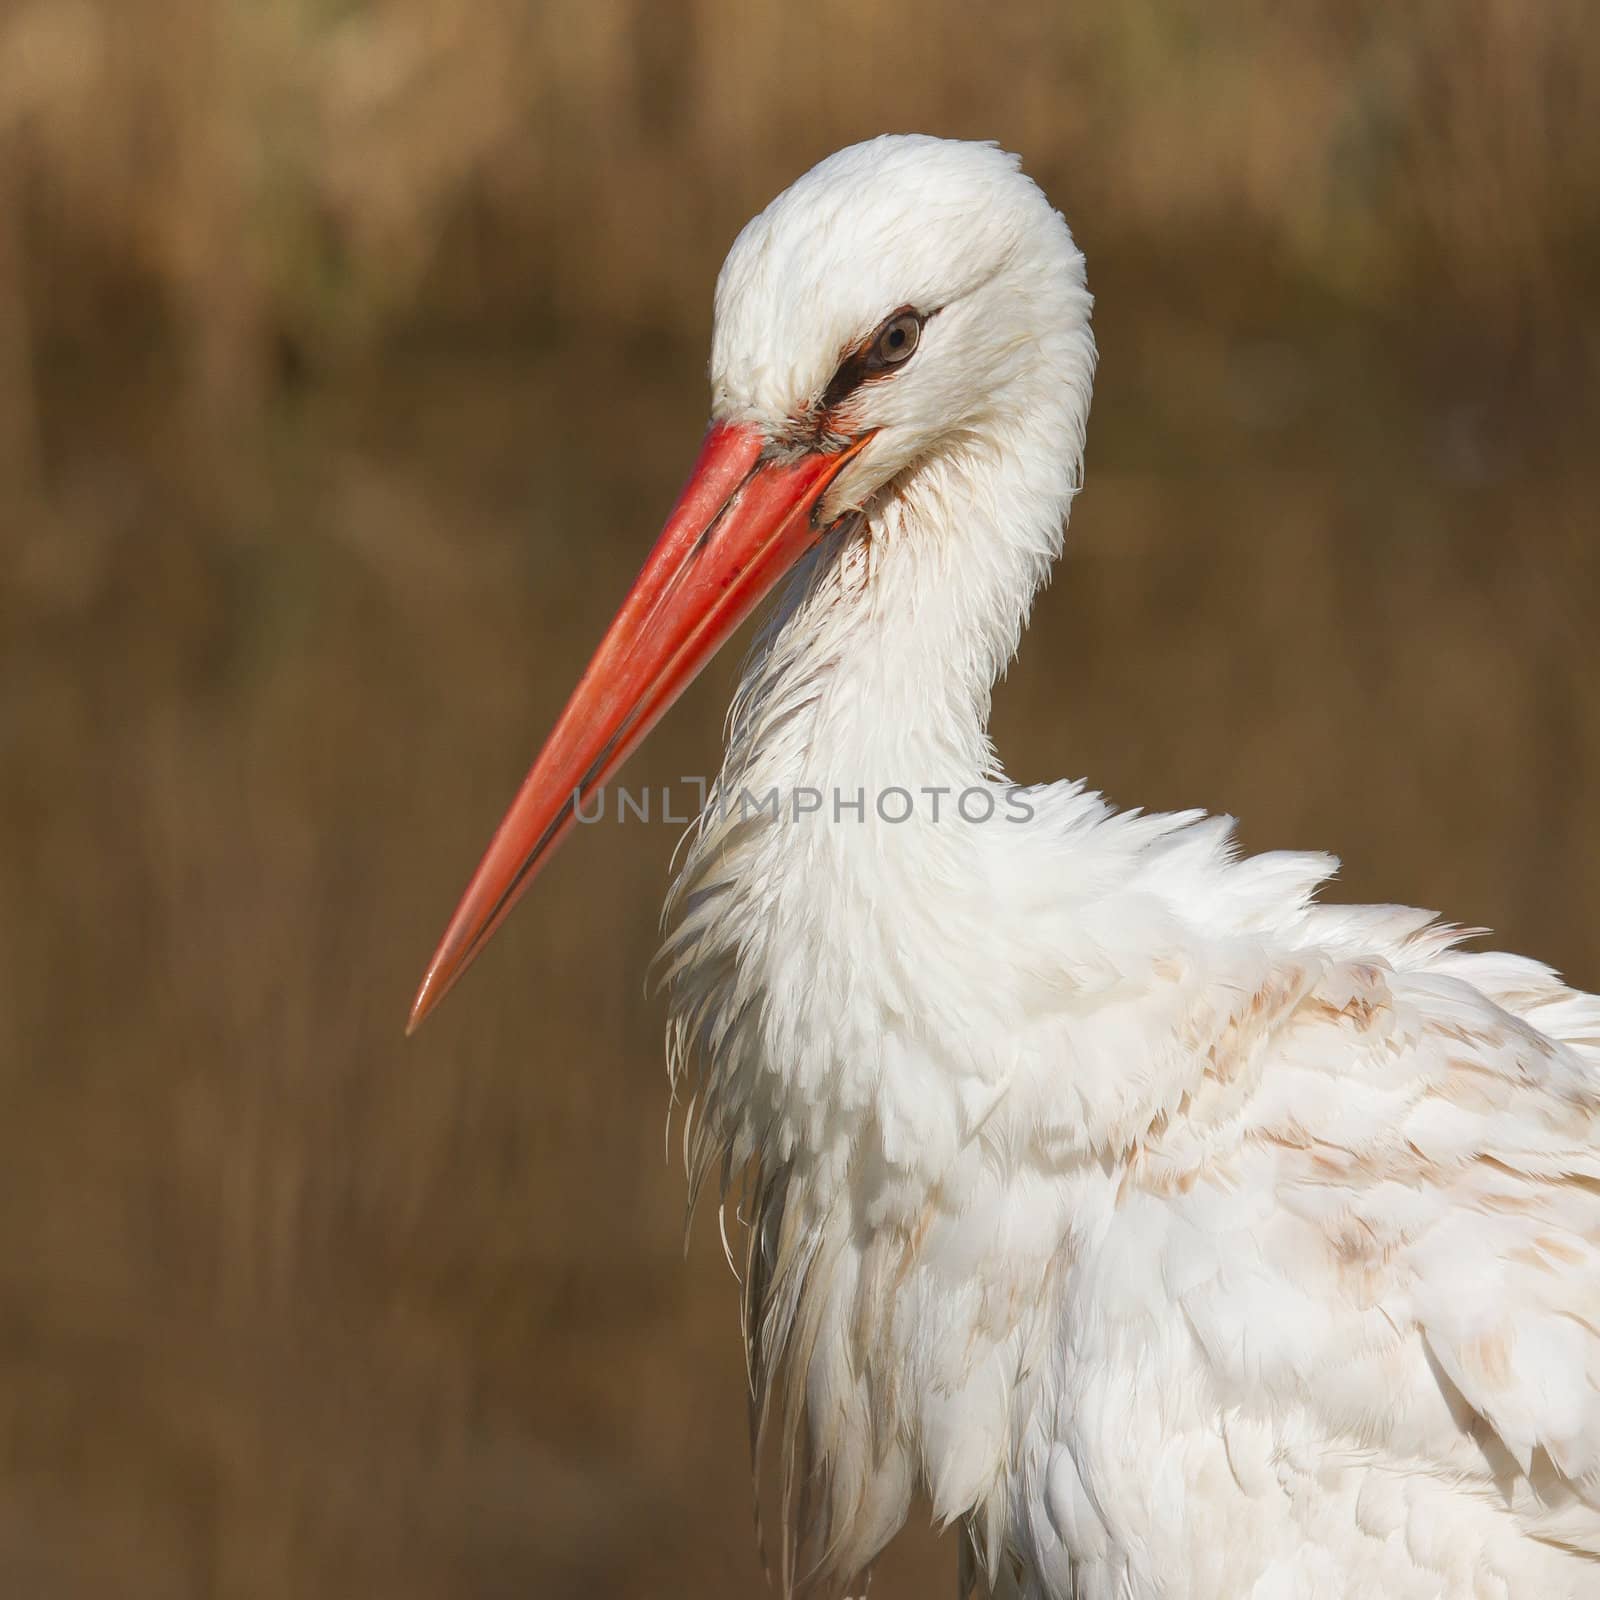 Close-up of a stork by michaklootwijk